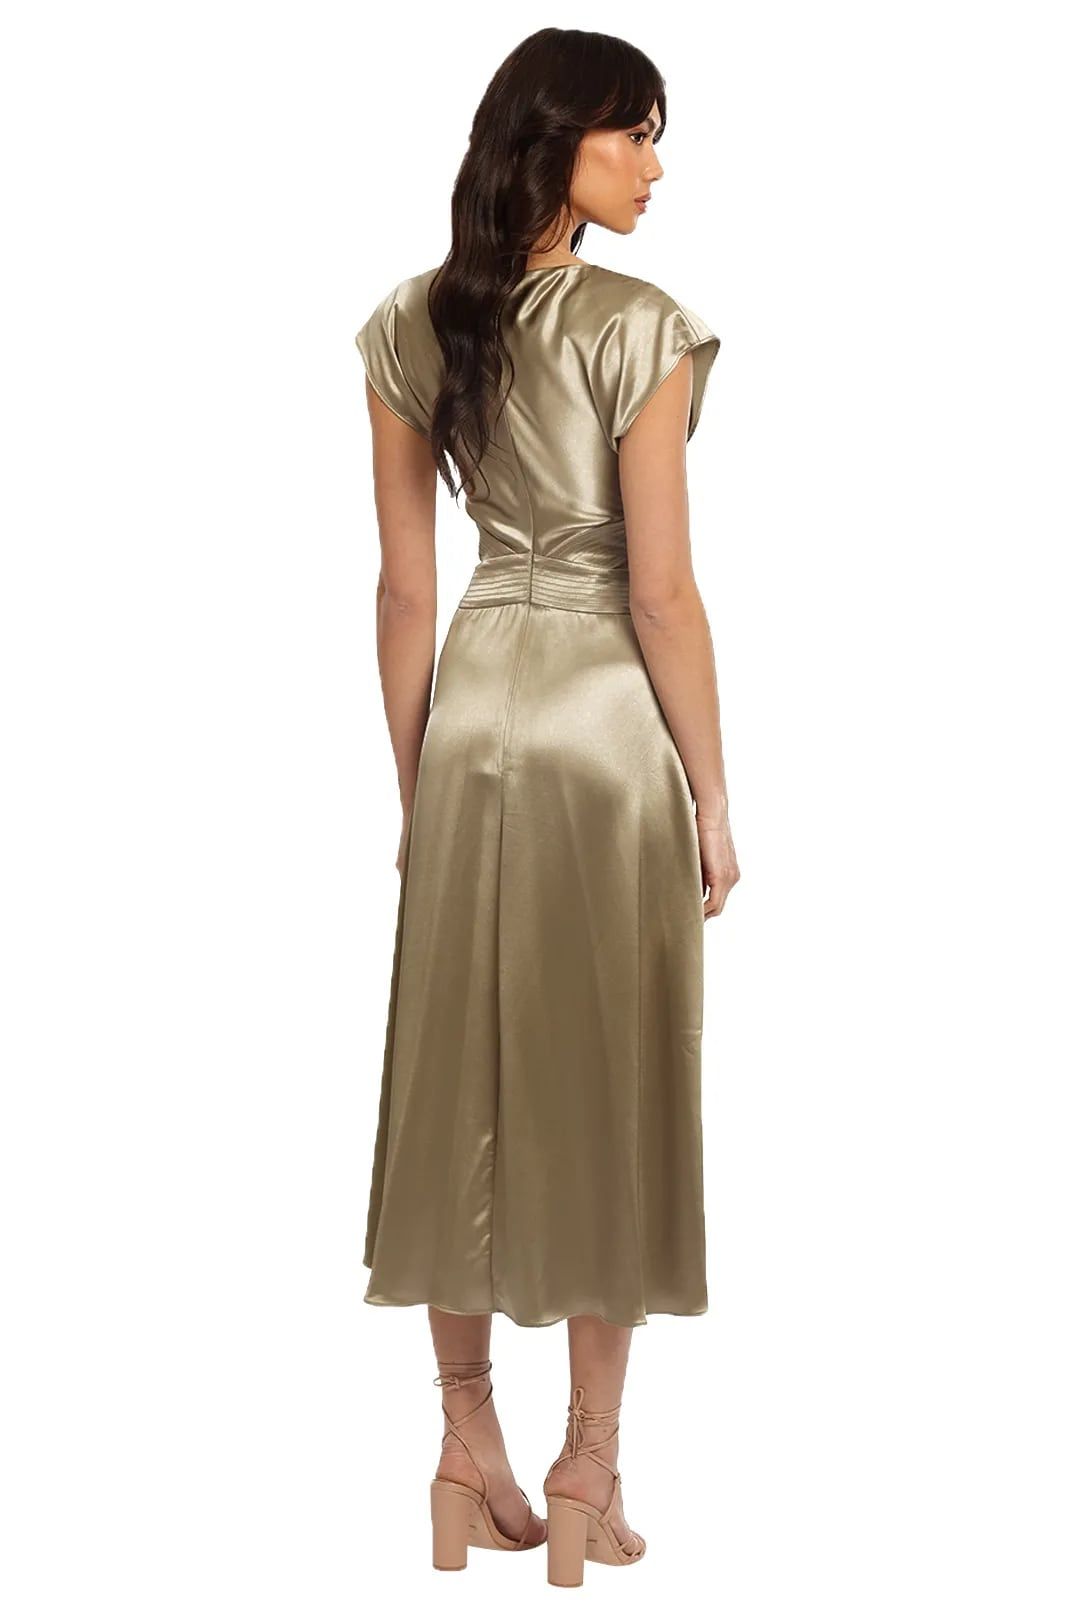 Plympton dress in khaki for formal events.